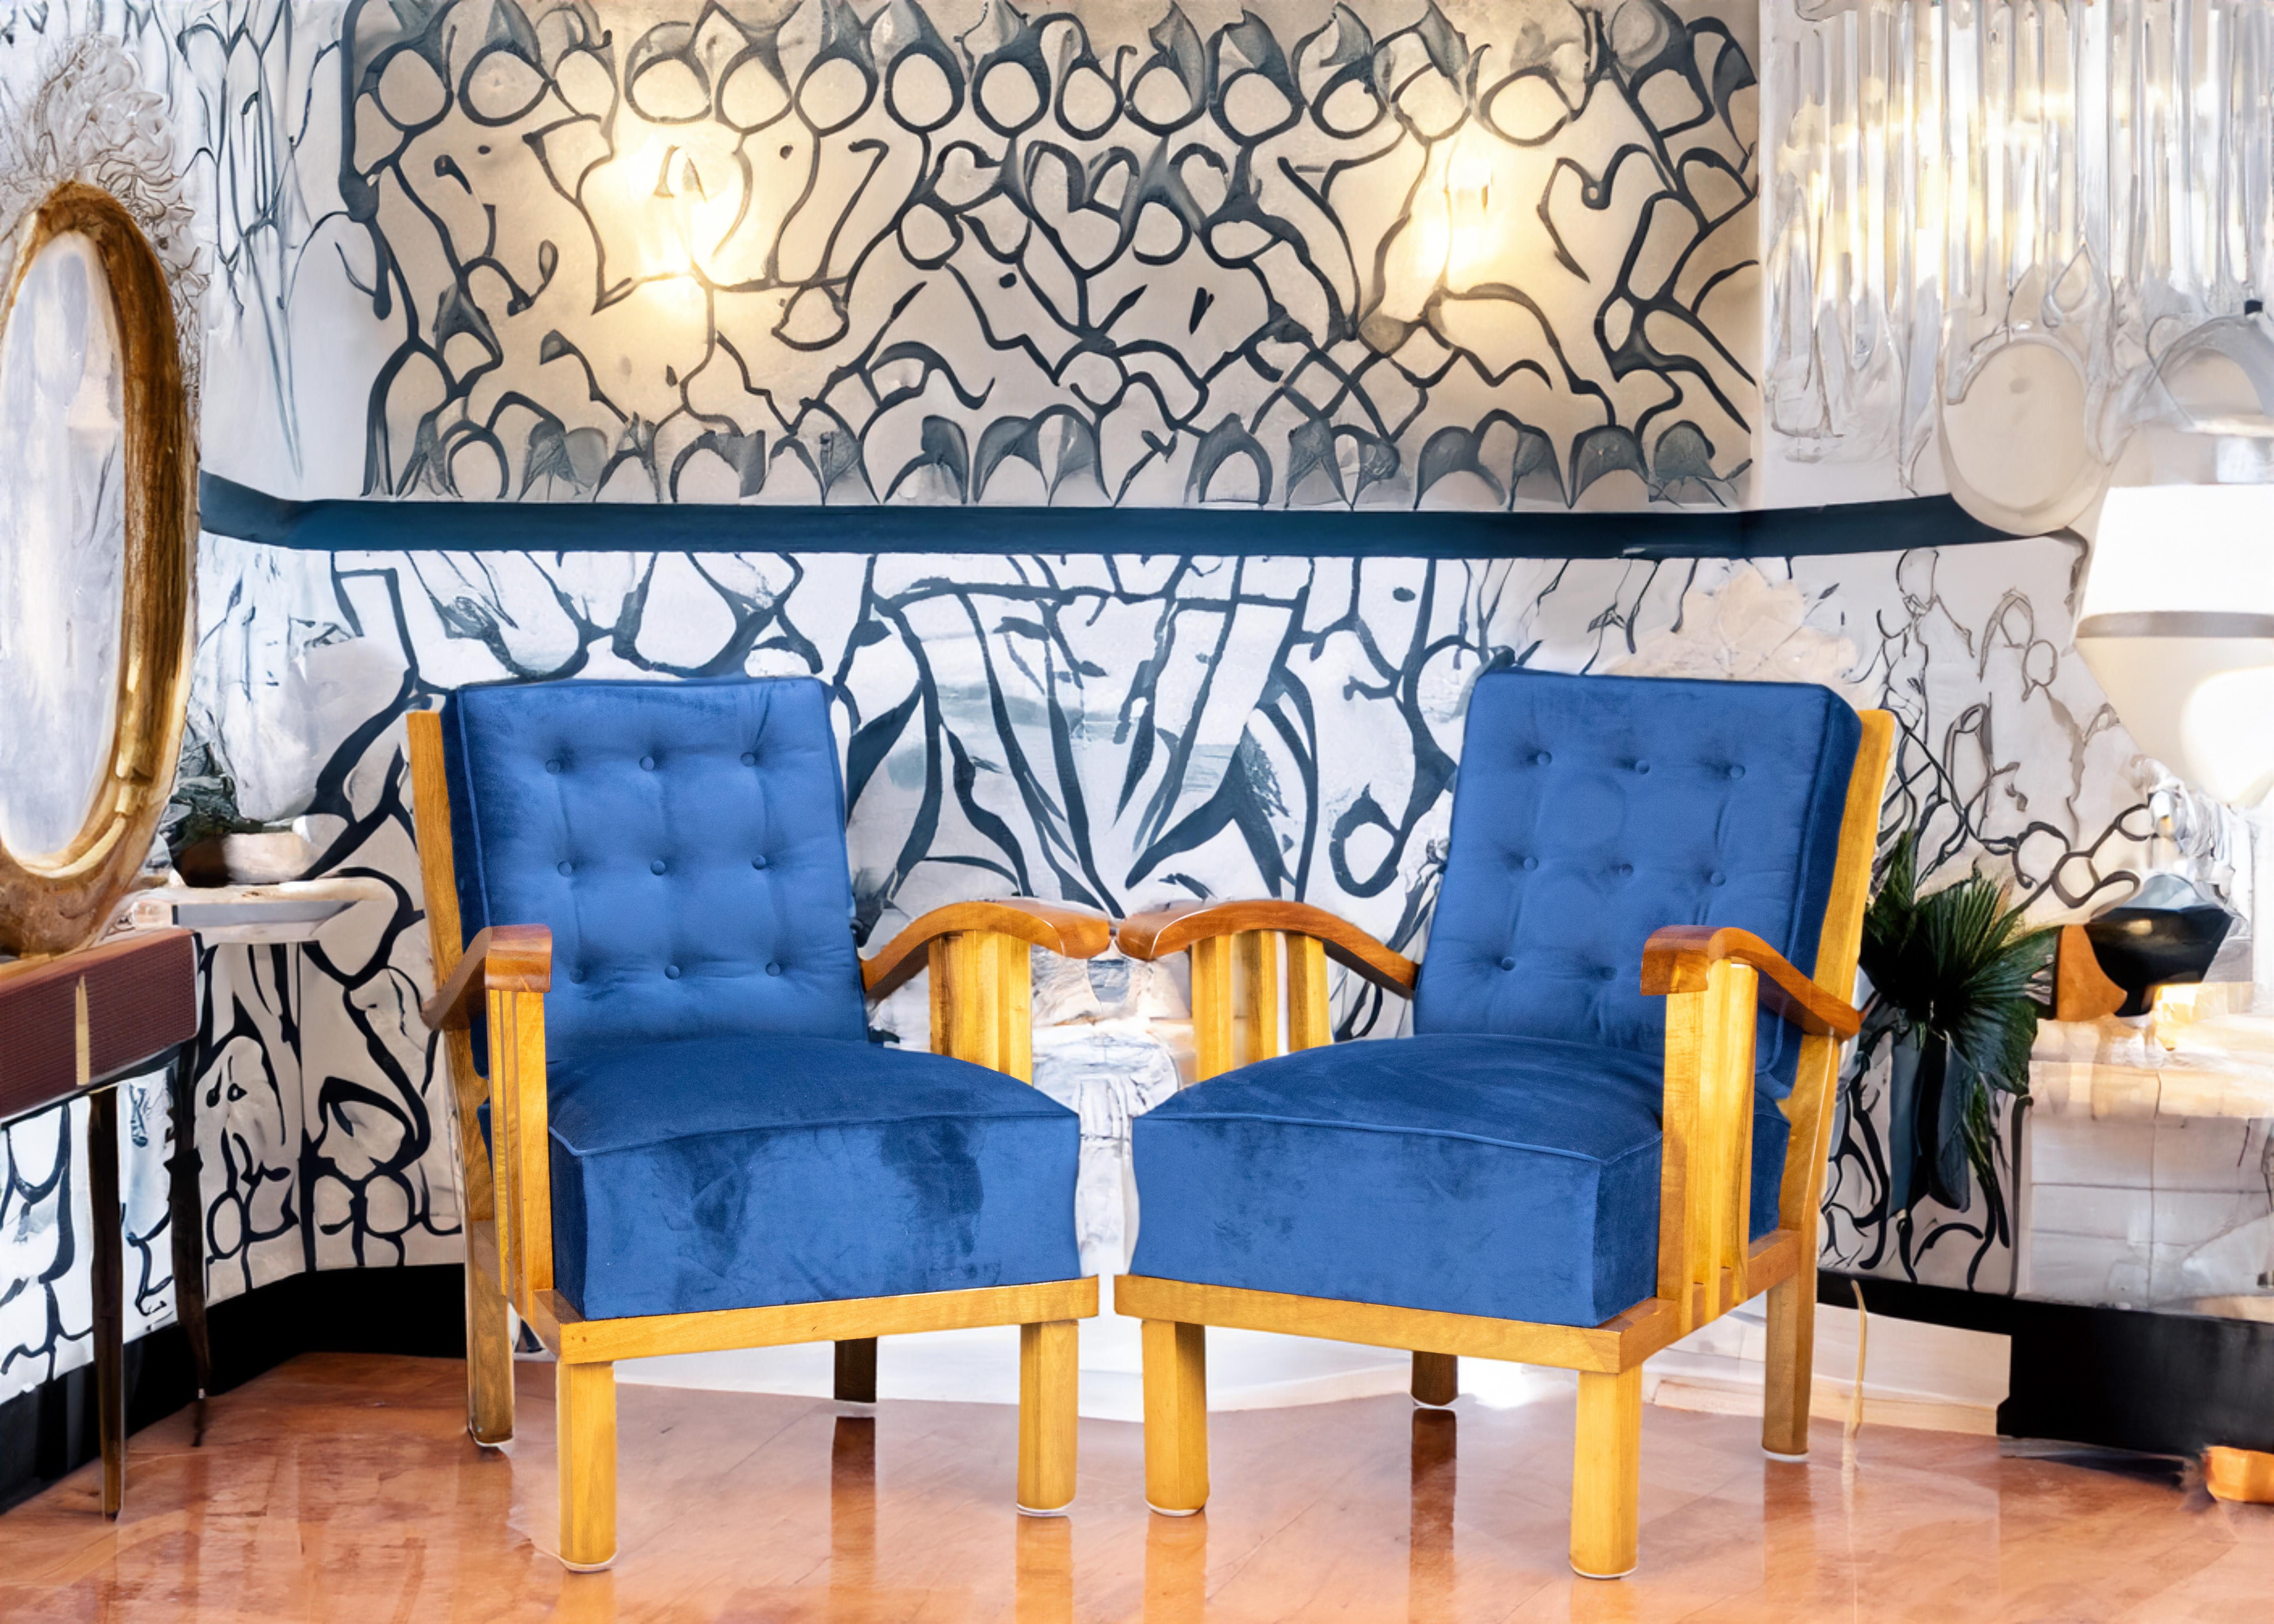 This beautiful pair of Art Deco armchairs were designed by the reknowned Hungarian designer Lajos Kozma. The armchairs underwent careful restoration - the wood surface was treated with shellac, the upholstery was carefully restored using period